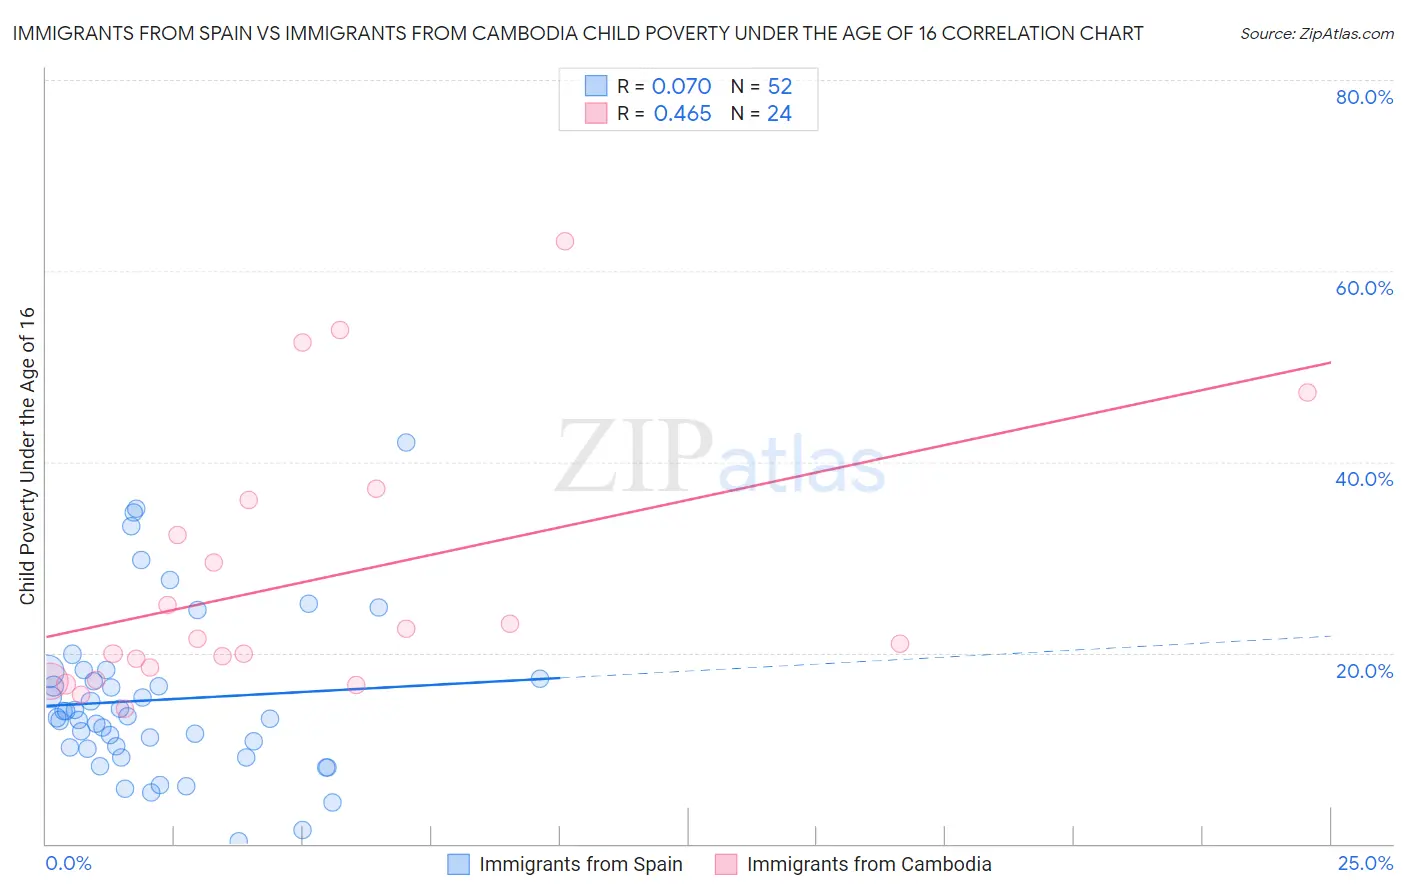 Immigrants from Spain vs Immigrants from Cambodia Child Poverty Under the Age of 16